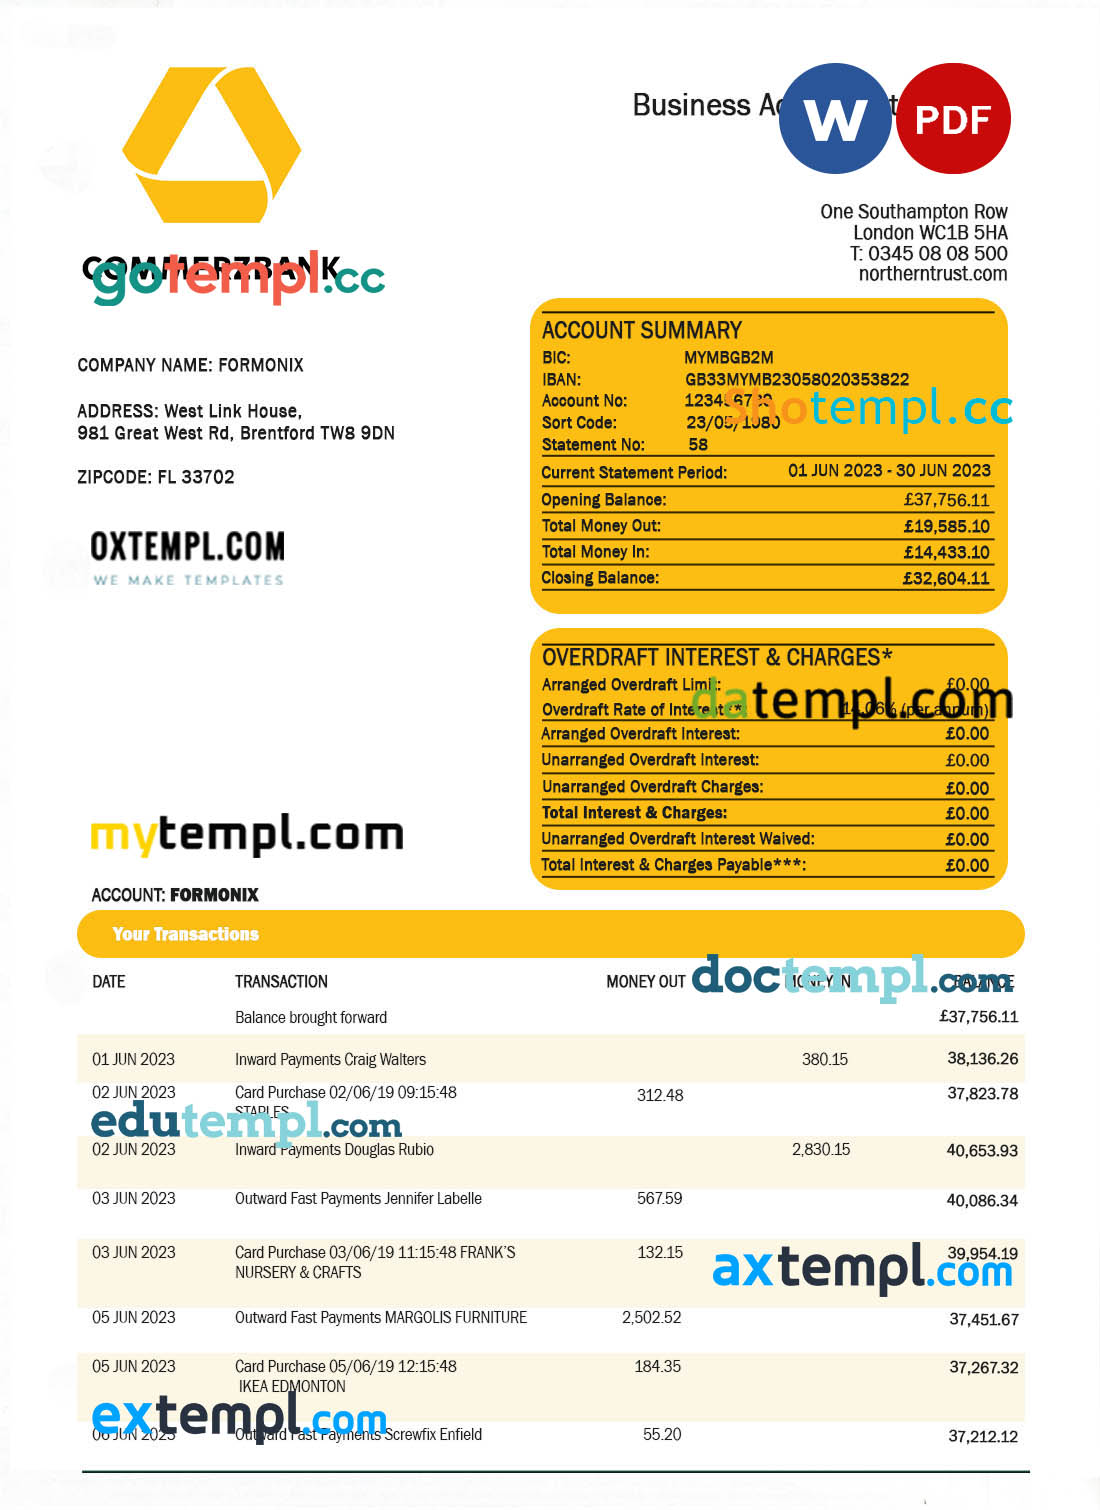 editable template, Commerzbank company checking account statement Word and PDF template